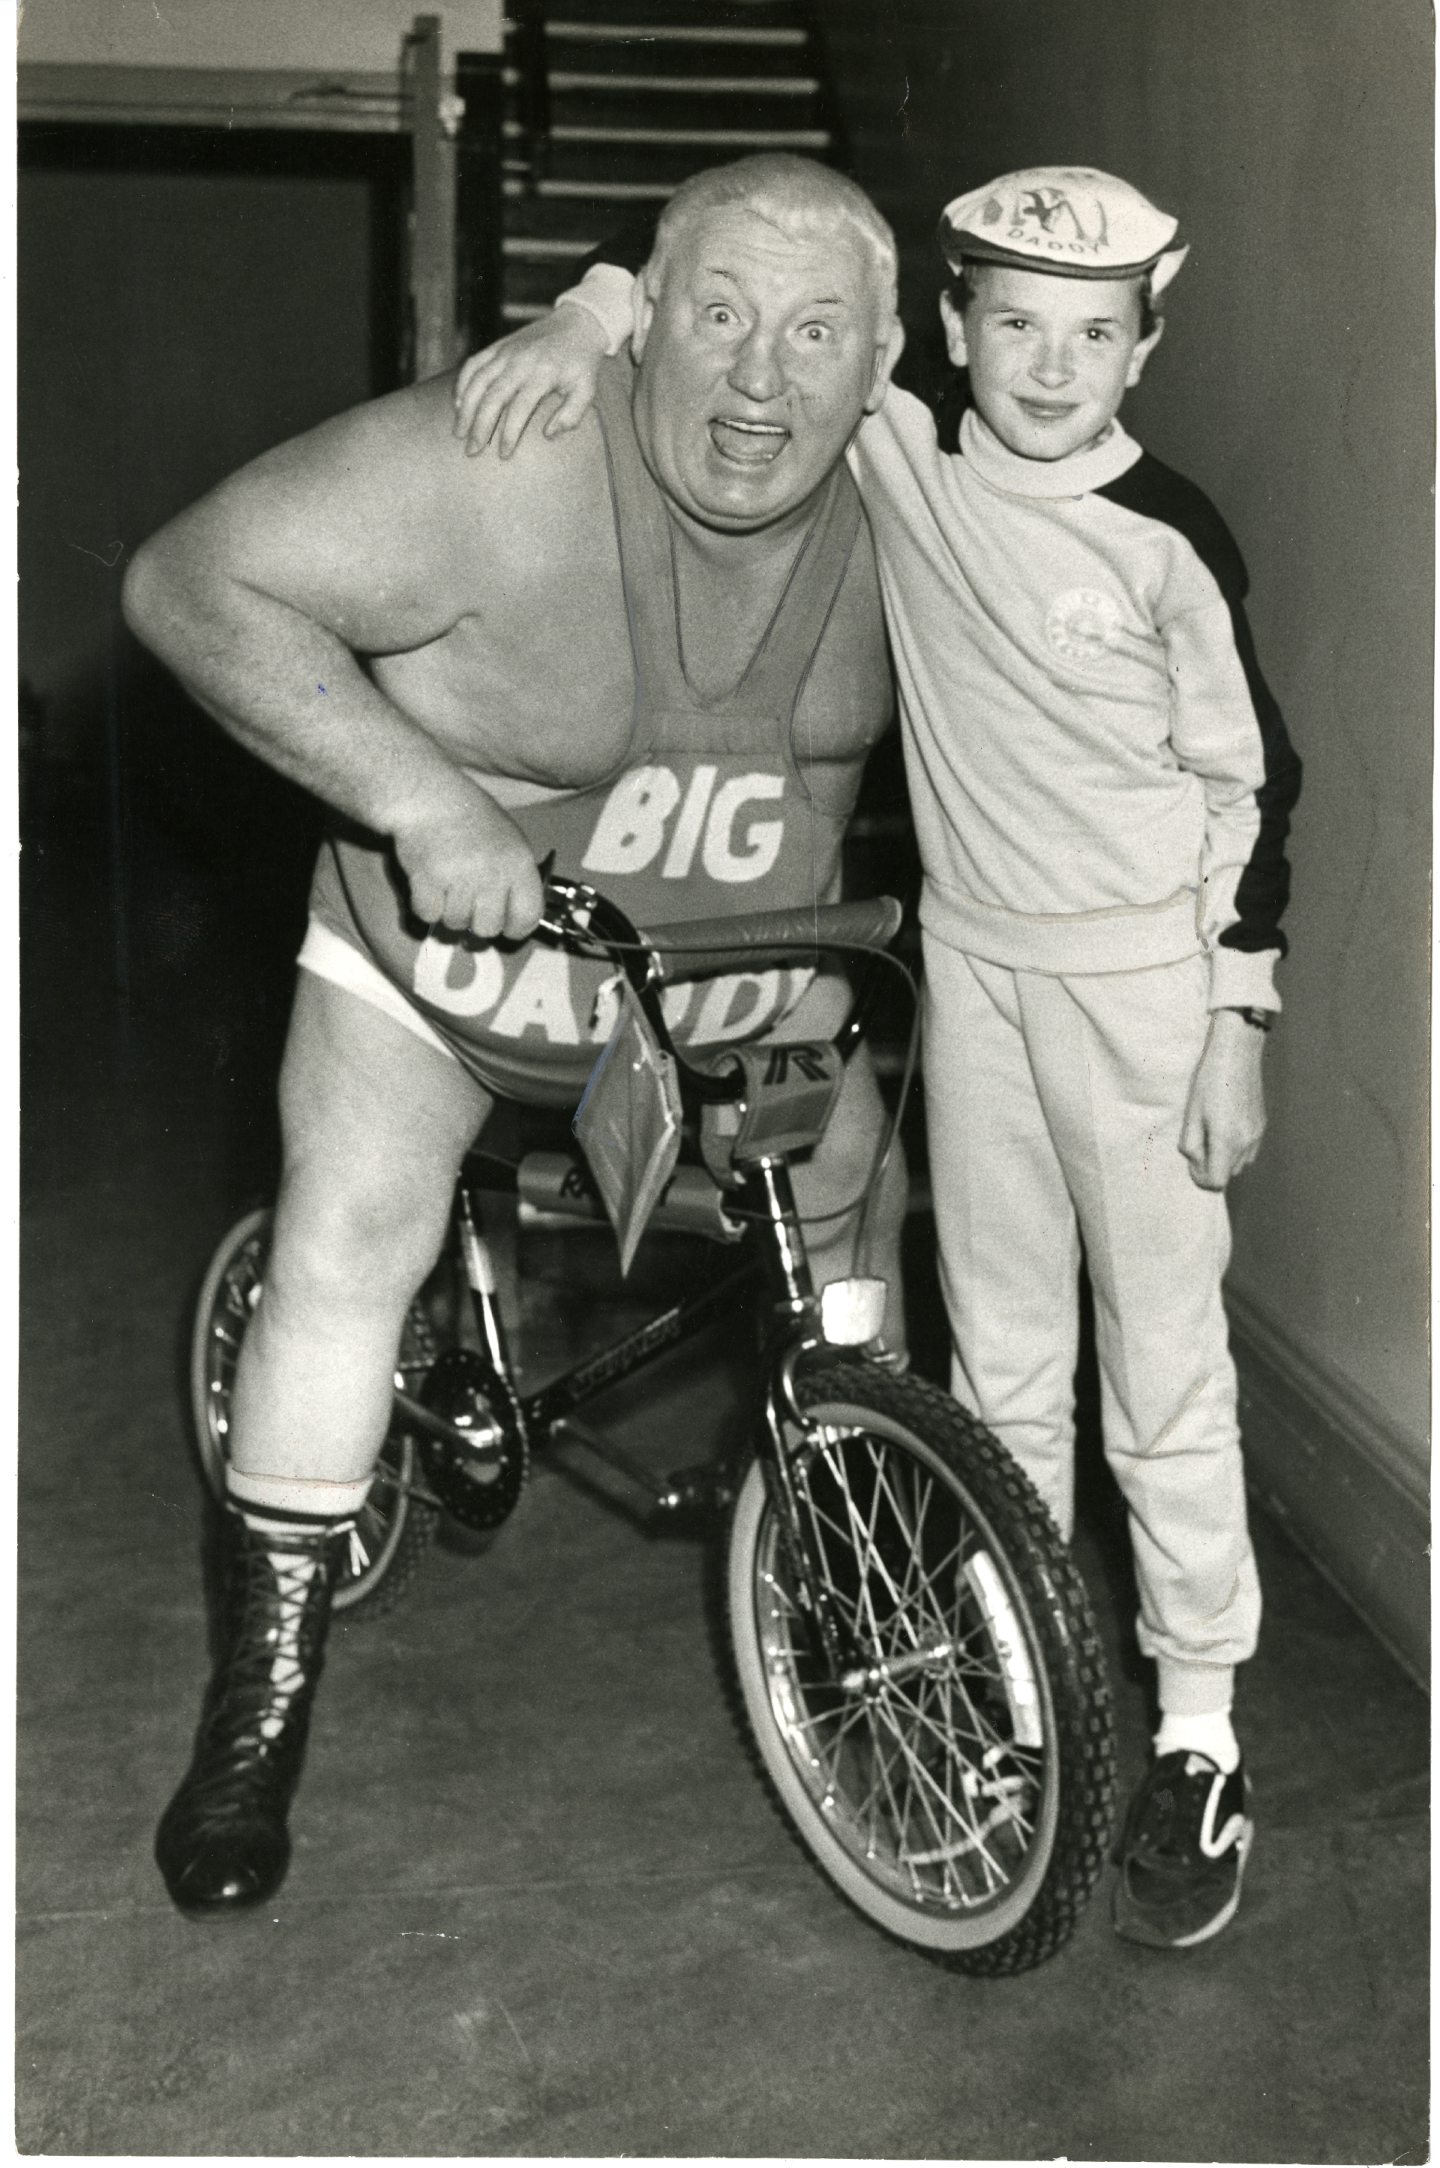 Big Daddy gets on his bike at the Caird Hall alongside a fan in 1985. Image: DC Thomson.